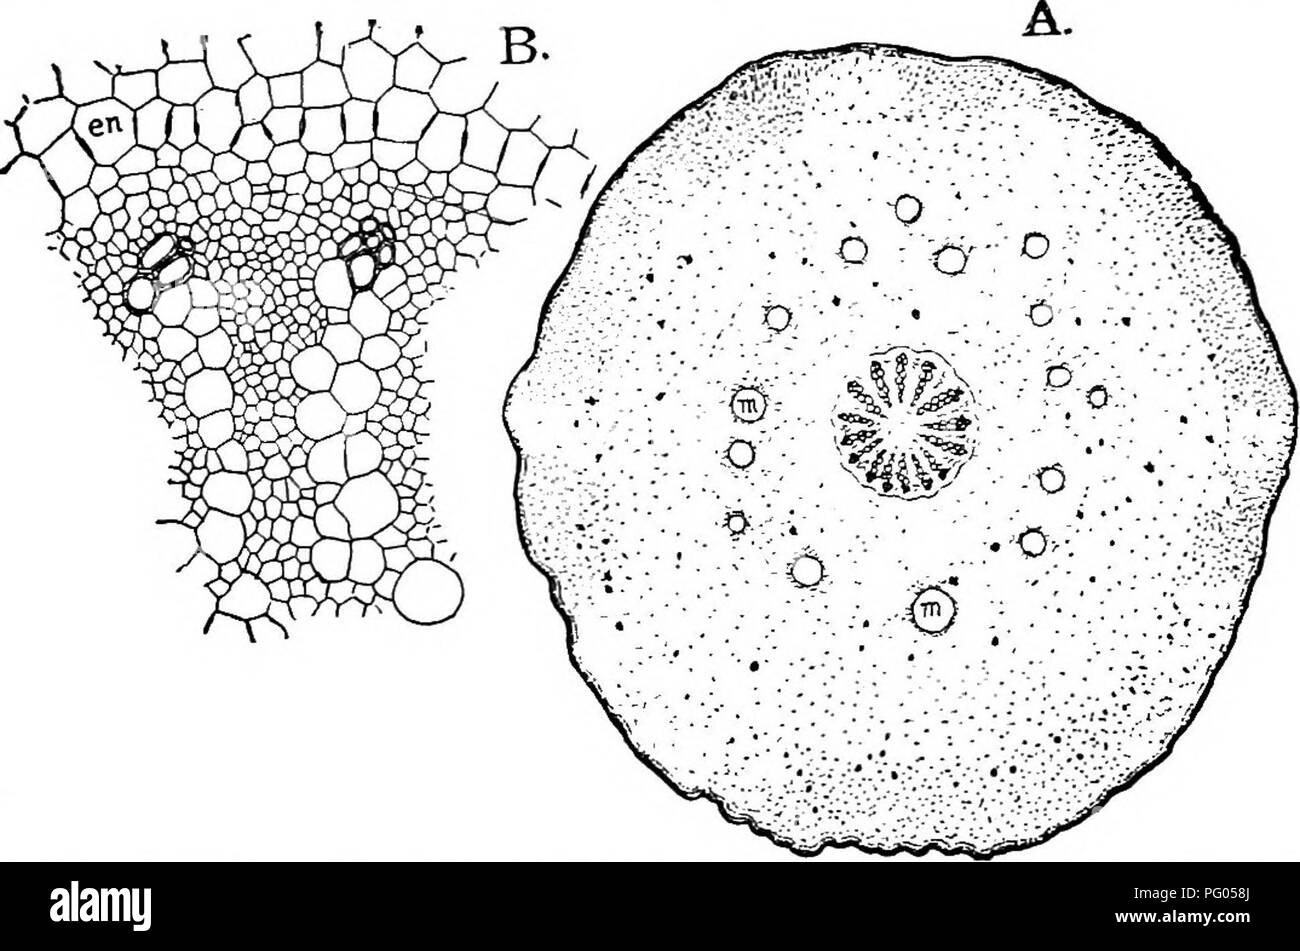 . The structure and development of mosses and ferns (Archegoniatae). Plant morphology; Mosses; Ferns. VIII MARATTIALES 291 ever, bath of Marattia and Angiopteris, there is but a single axial bundle, as in the petiole of the cotyledon. Fig. 167, B shows a cross-section of a pinnule from a large leaf of A. evecta, which has much the same structure as that of Marattia. The central vascular bundle is horse-shoe shaped in section, and shows a central mass of large tracheids with retic- ulate or scalariform markings, surrounded by the phloem made up of very large sieve-tubes much like those of Botry Stock Photo